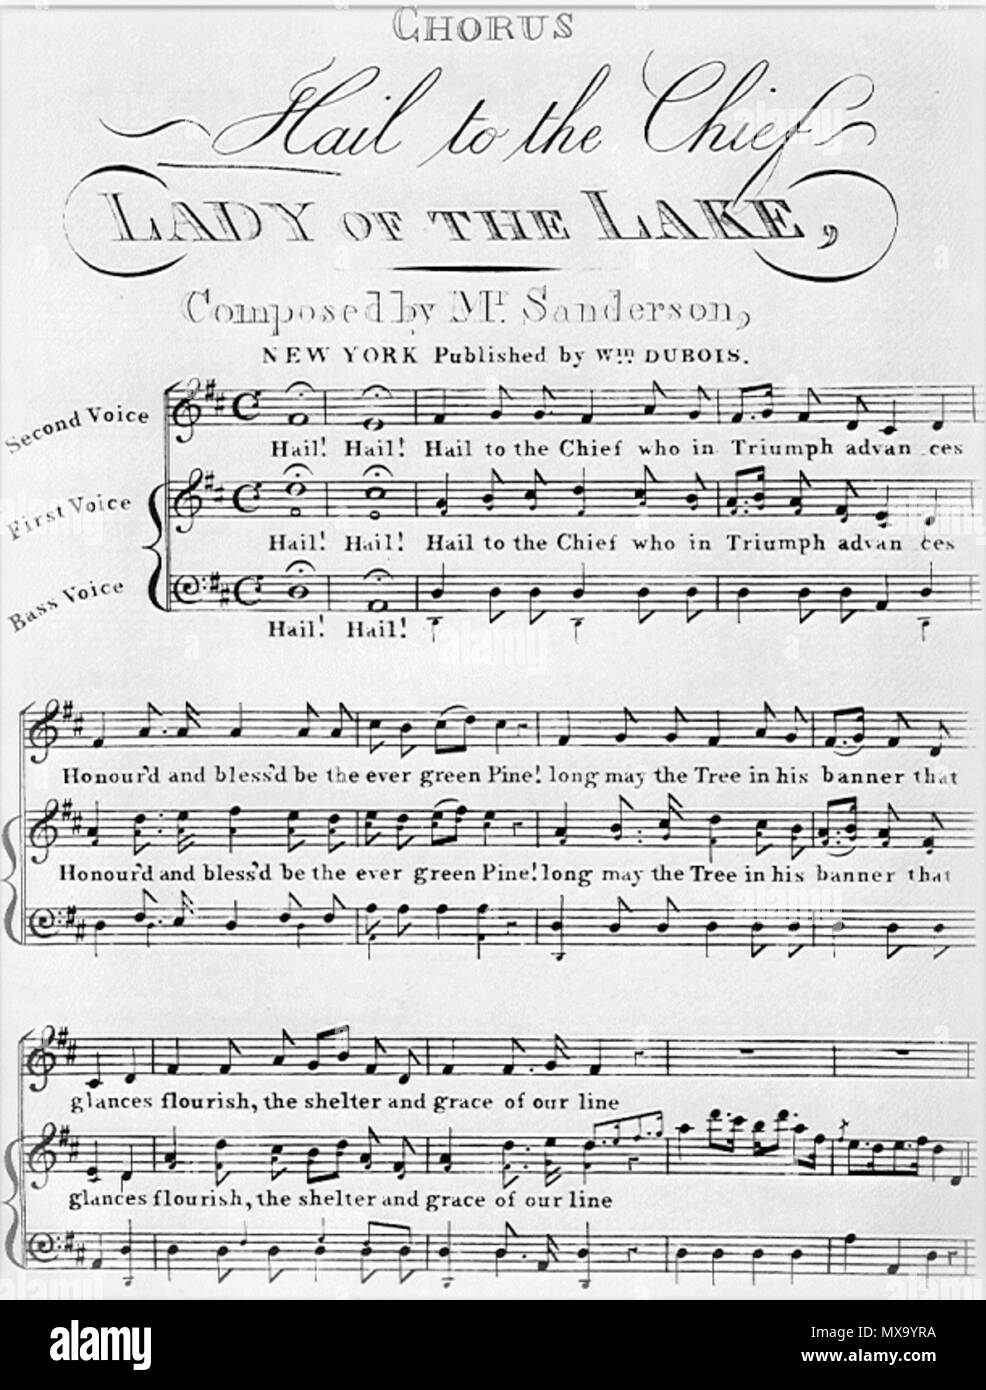 . The author is a Mr Sanderson. This is a picture of the chorus of Hail to the Chief sheet music. The website where I found this image is http://www.jmu.edu/madison/center/main pages/material/audio/music/hail.htm. Uploaded to Wikipedia 2006-07-24. This file is lacking author information. 264 Hail to the Chief Chorus Sheet Music Stock Photo